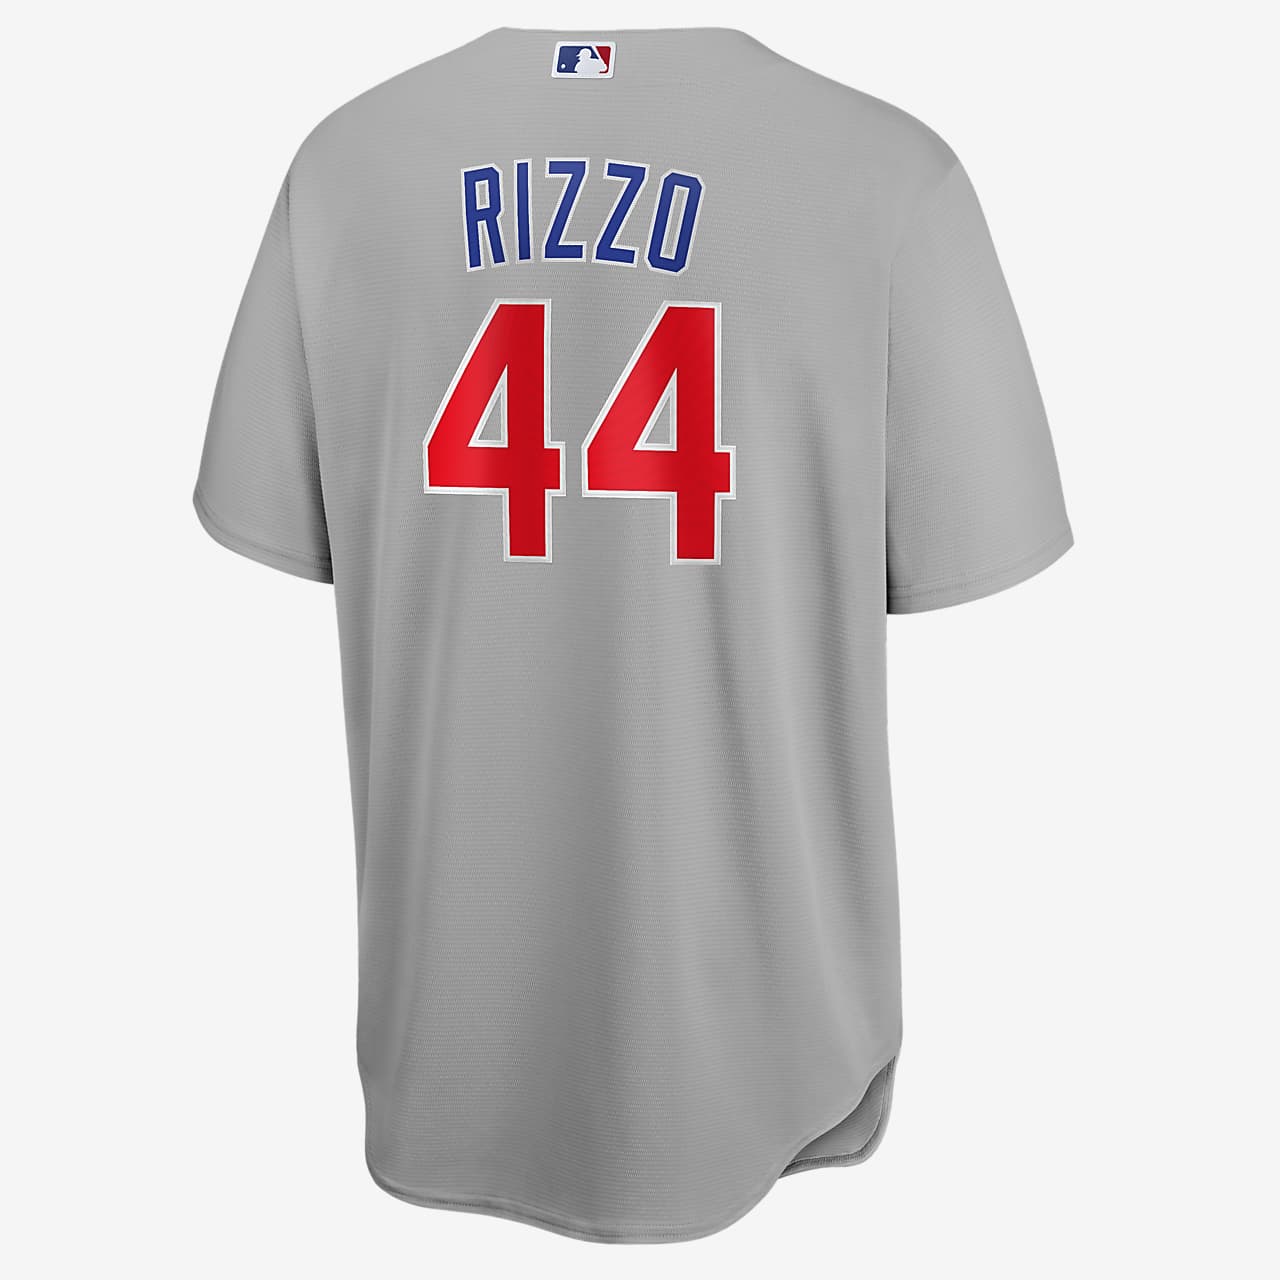 anthony rizzo cubs jersey